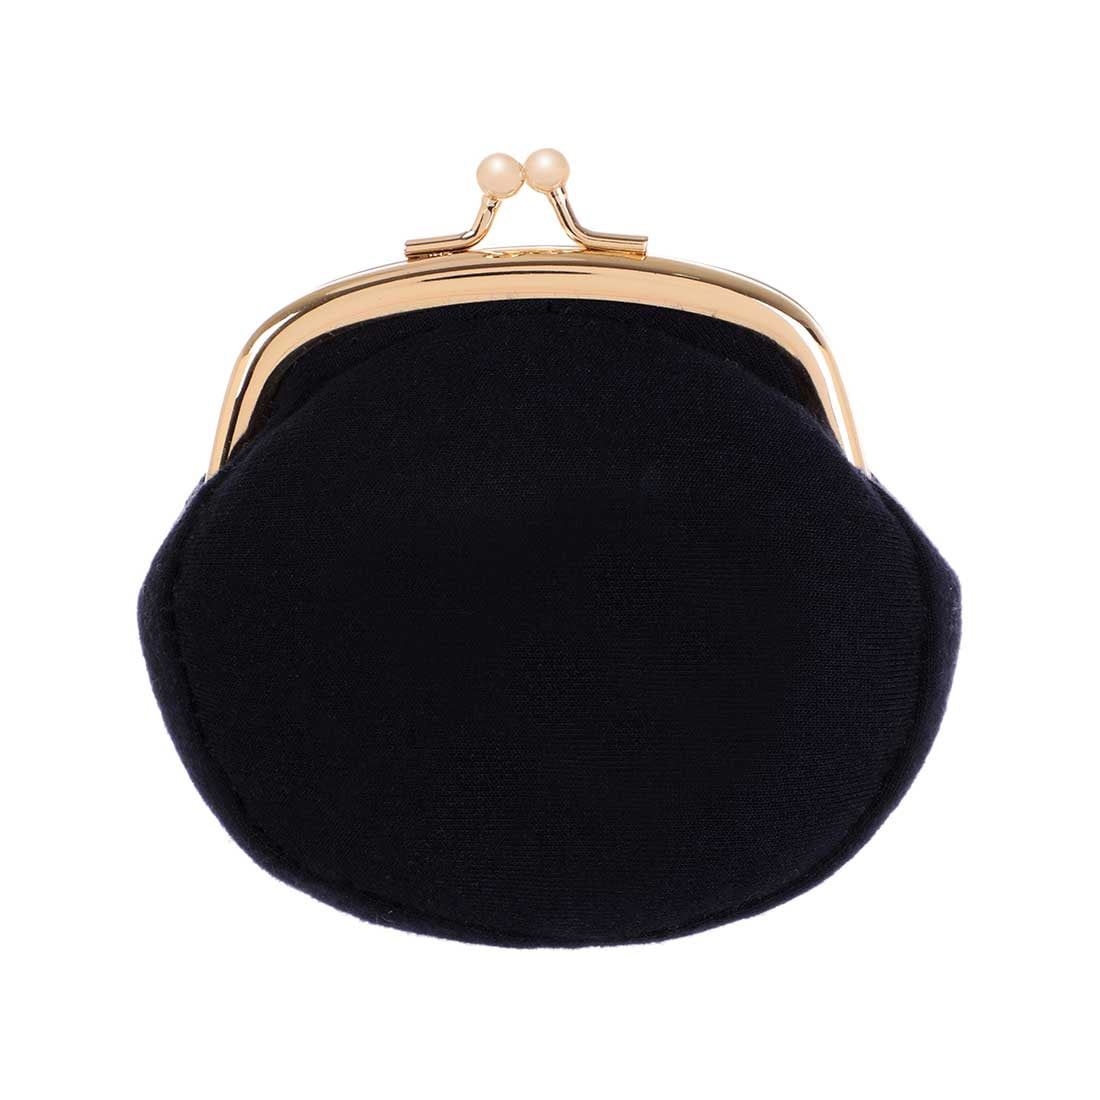 M58009 MINI POCHETTE ACCESSOIRES N58009 Iconic Fashion Womens CANVAS Pouch  Evening Clutch Zippy Chain Wallet Coin Purse Phone Sling Bag From Join2,  $12.19